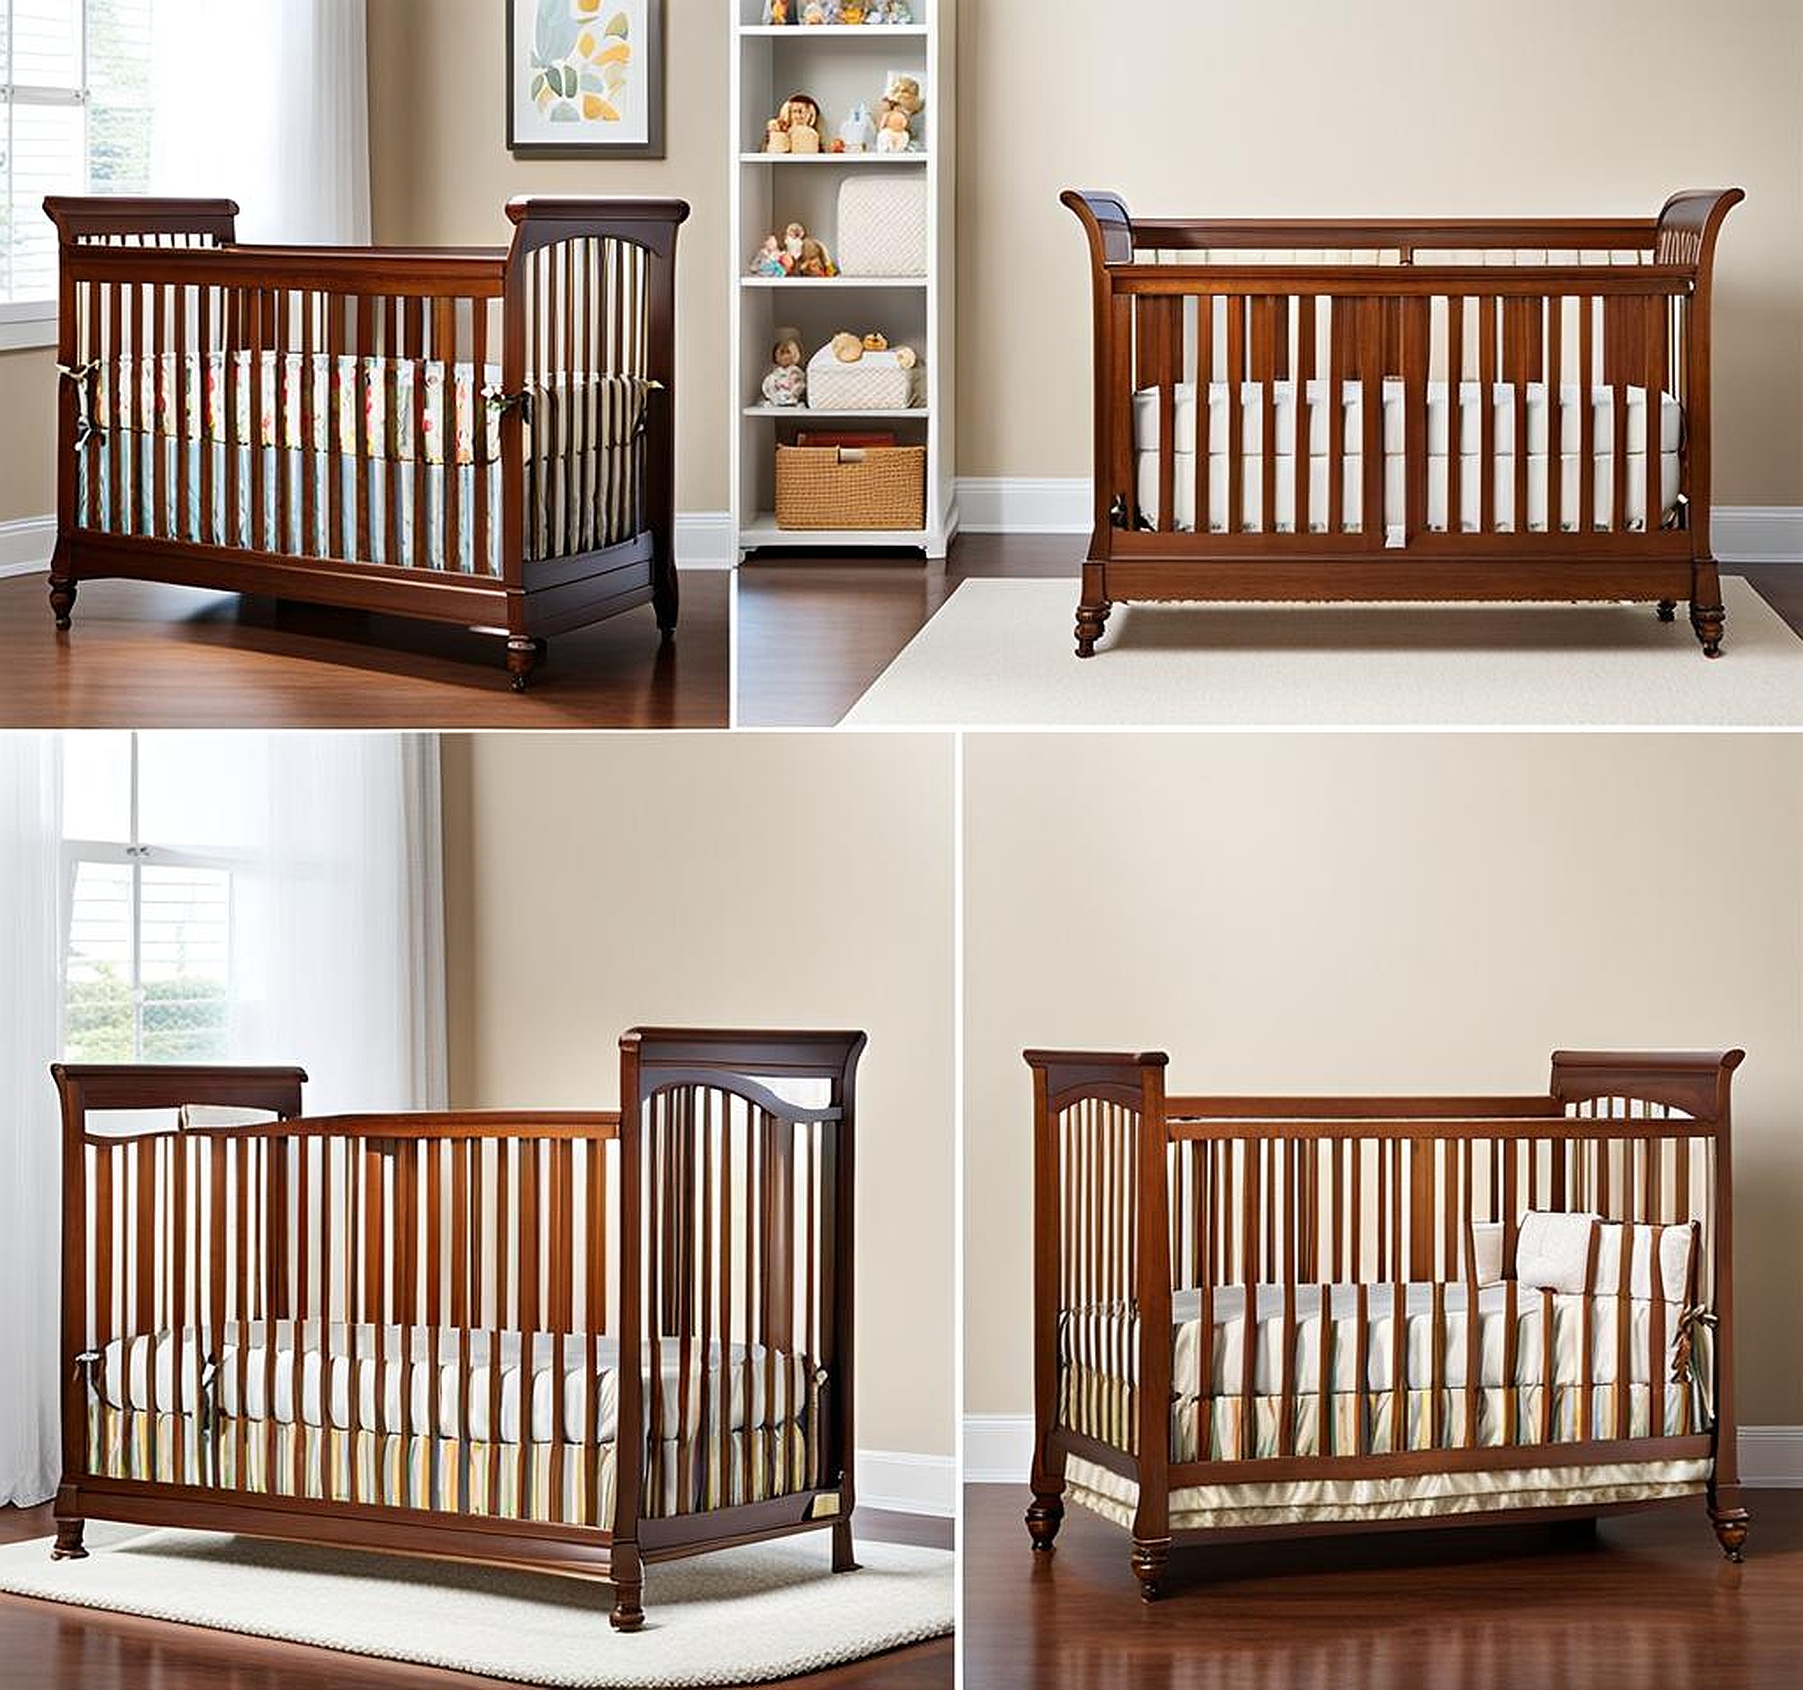 Top Rated Crib Options for Identical and Fraternal Twins